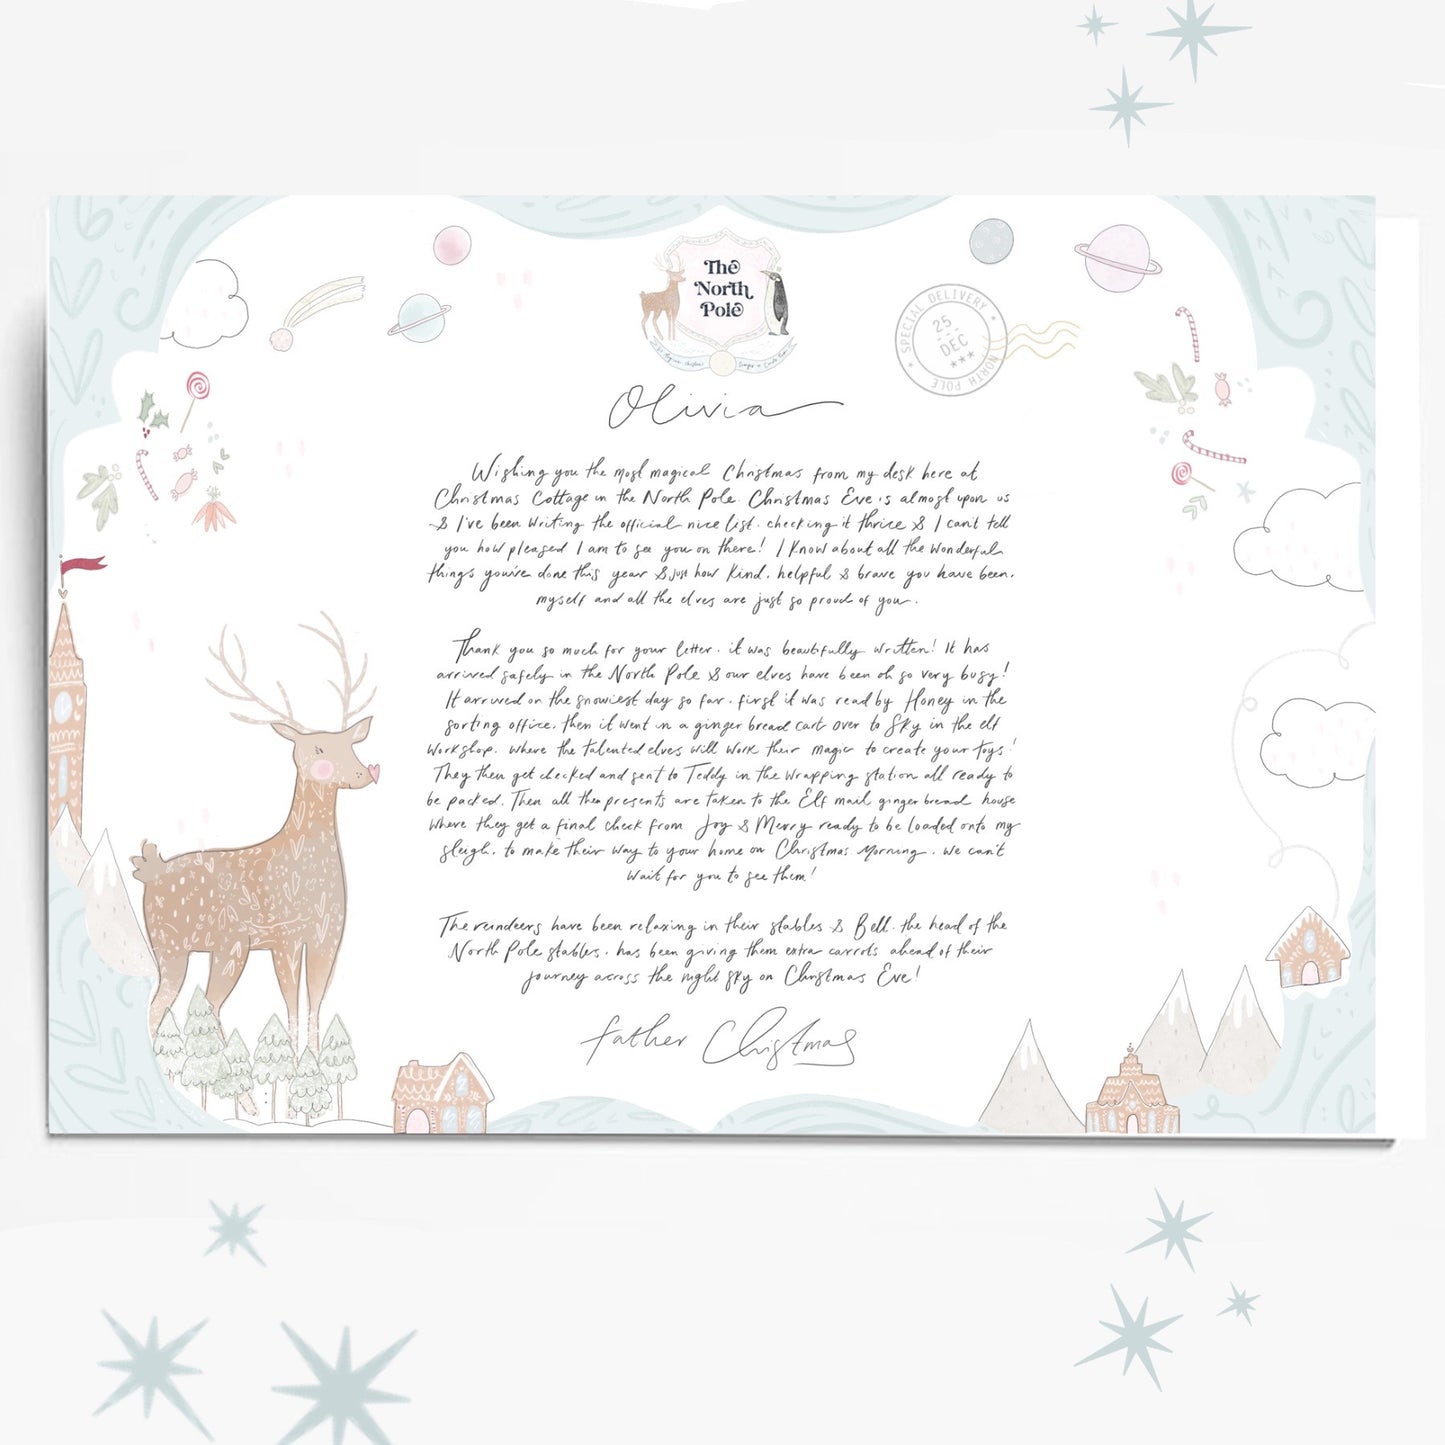 The official Nice list set- personalised gold foil North Pole